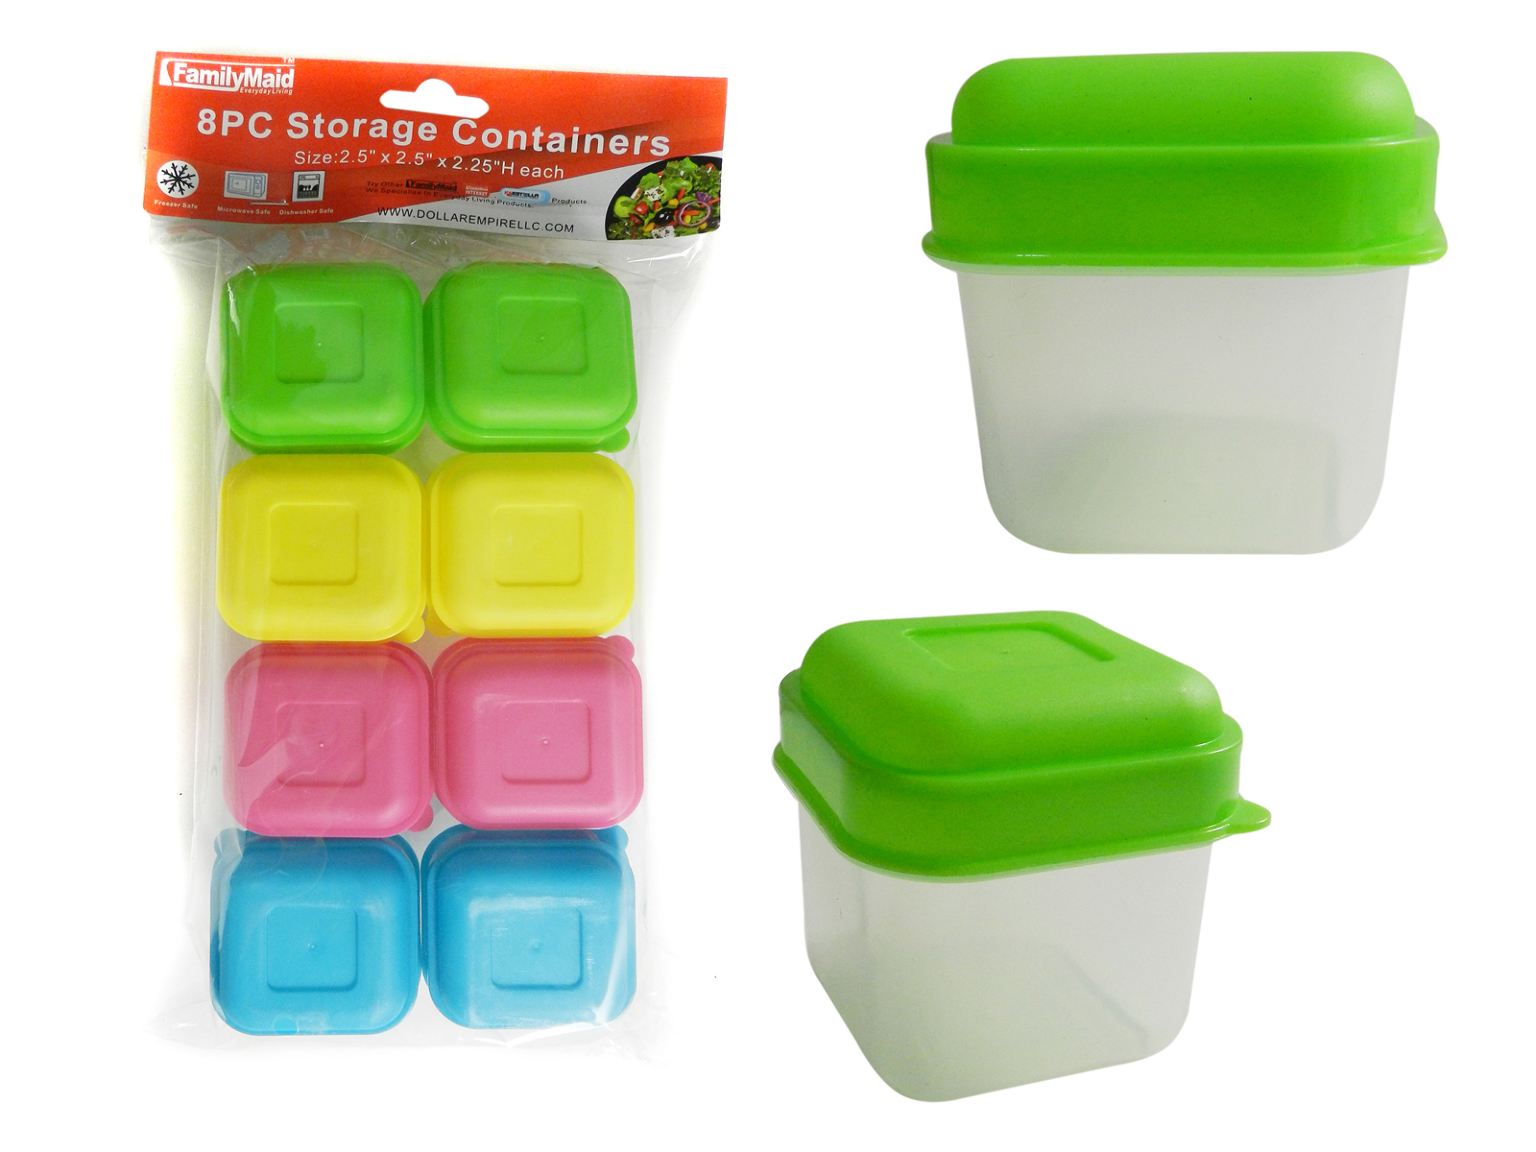 Wholesale 8 Piece Food Storage Containers with Lids 4 oz (SKU 2322820